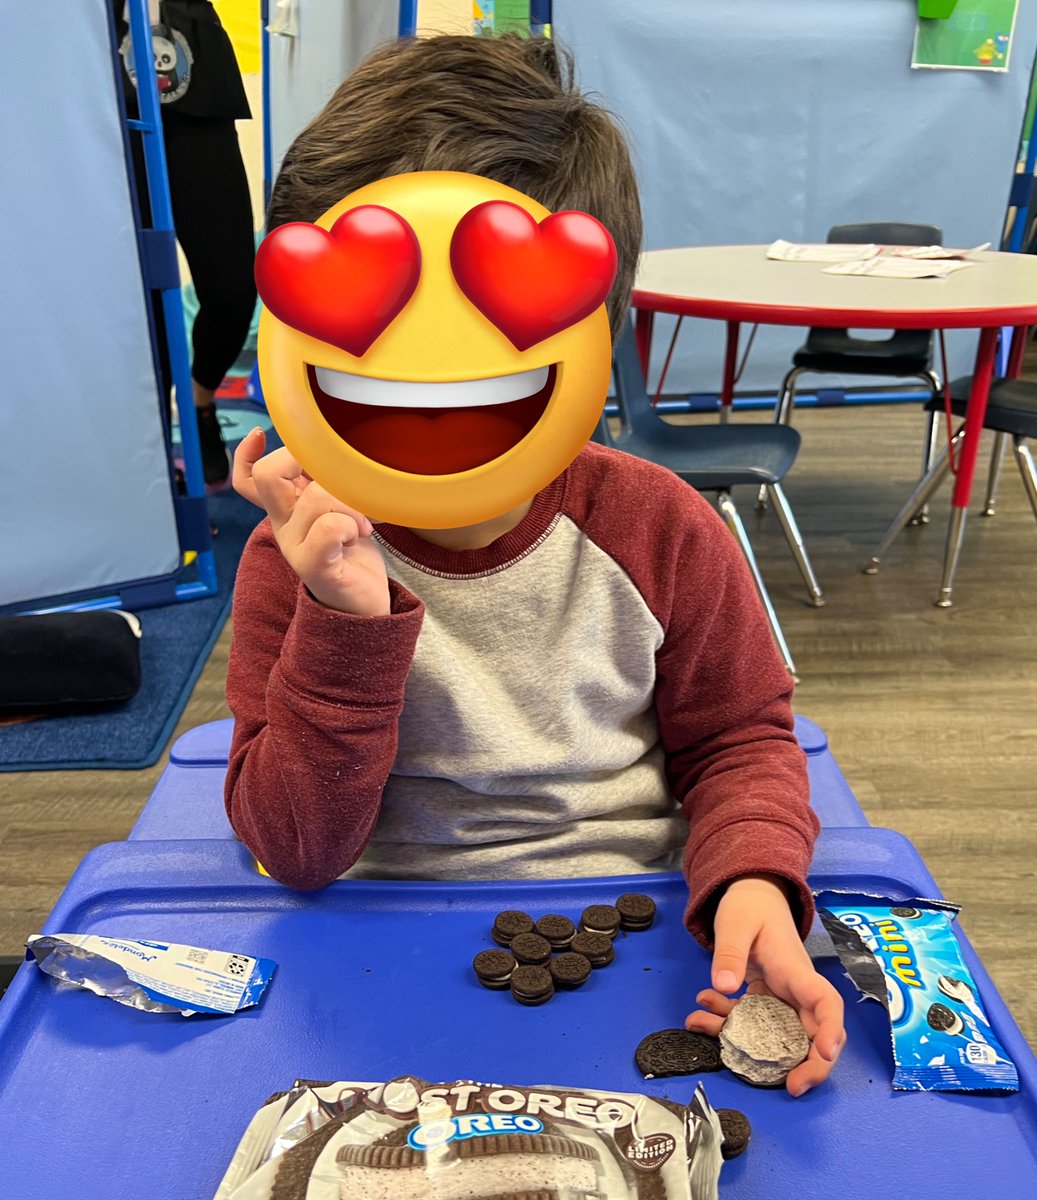 When @Oreo’s are your favorite thing EVER of course you just had to try the most Oreo Oreos. We loved them! These kids have my heart! 😍 #LHCSD #PandaPride